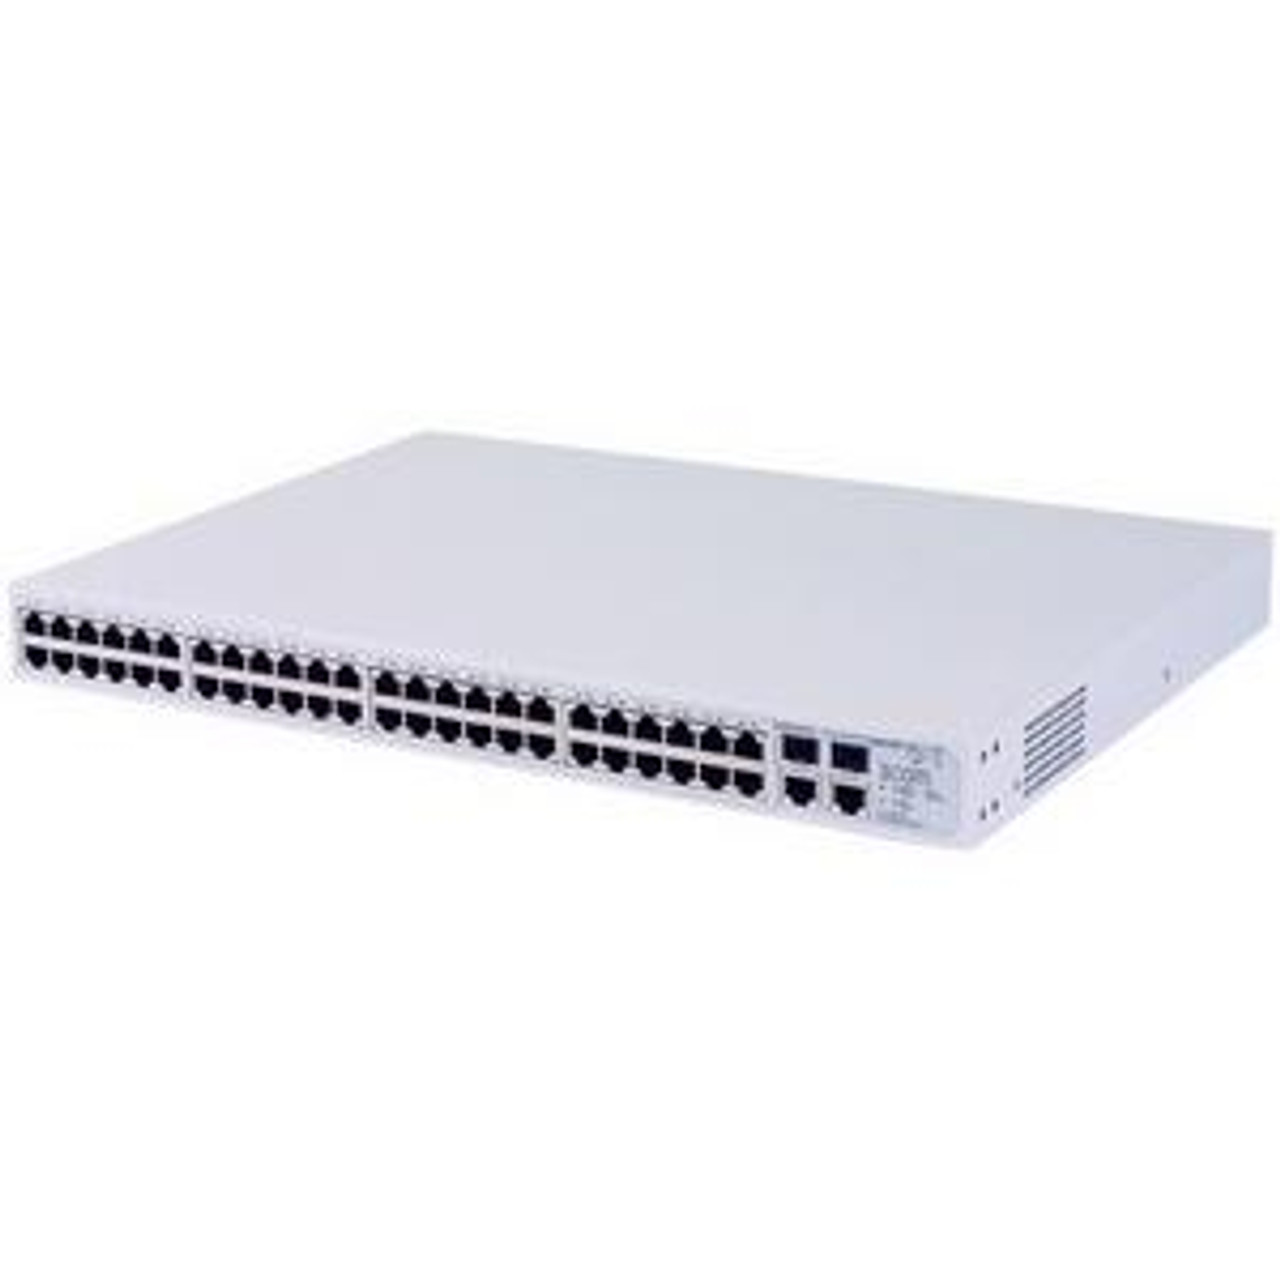 3CR17501-91 - SuperStack 3 Switch 3250